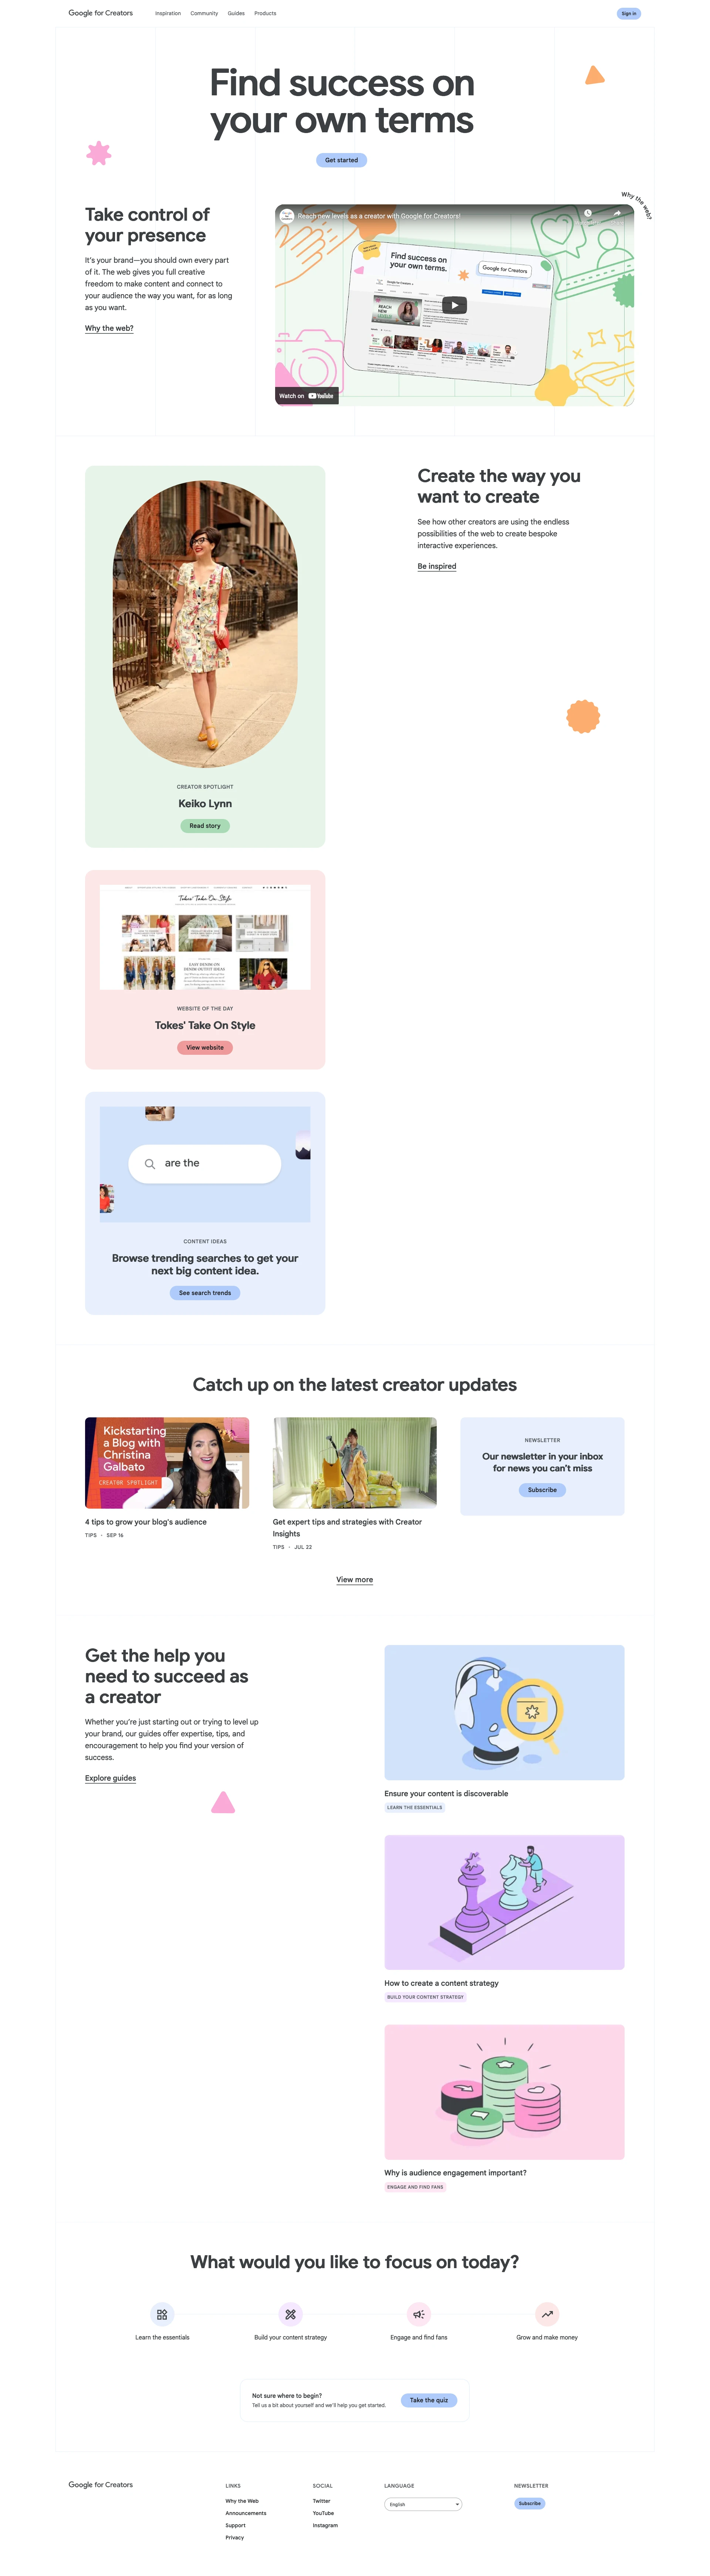 Google for Creators Landing Page Example: Get the help you need and explore how to create successful content, manage your online presence, and learn from a community of creators.